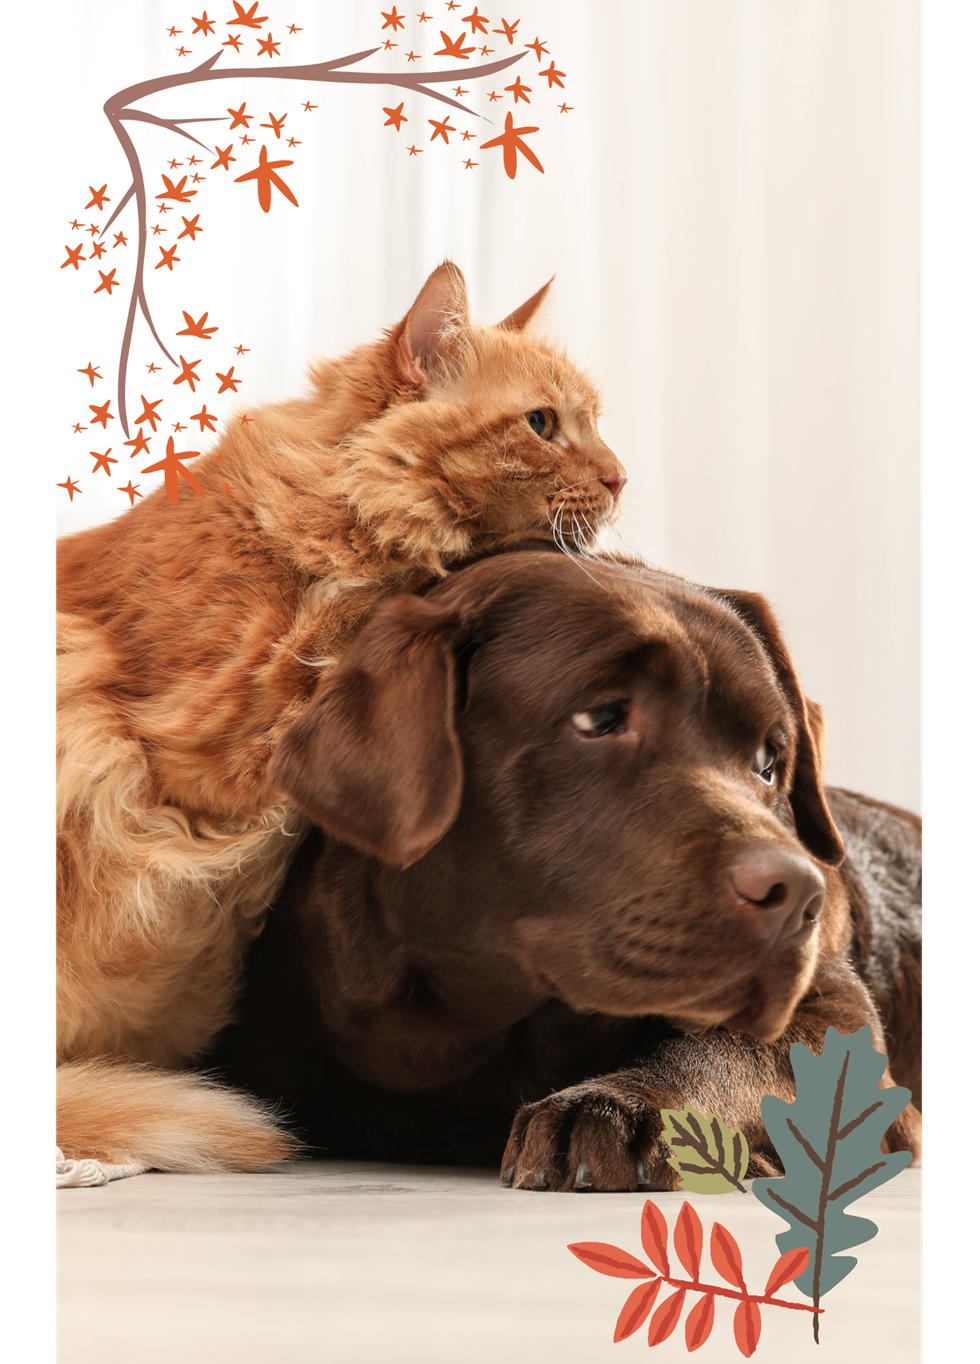 Chocolate Labrador retriever and fluffy orange tabby cat huddled together looking in same direction.